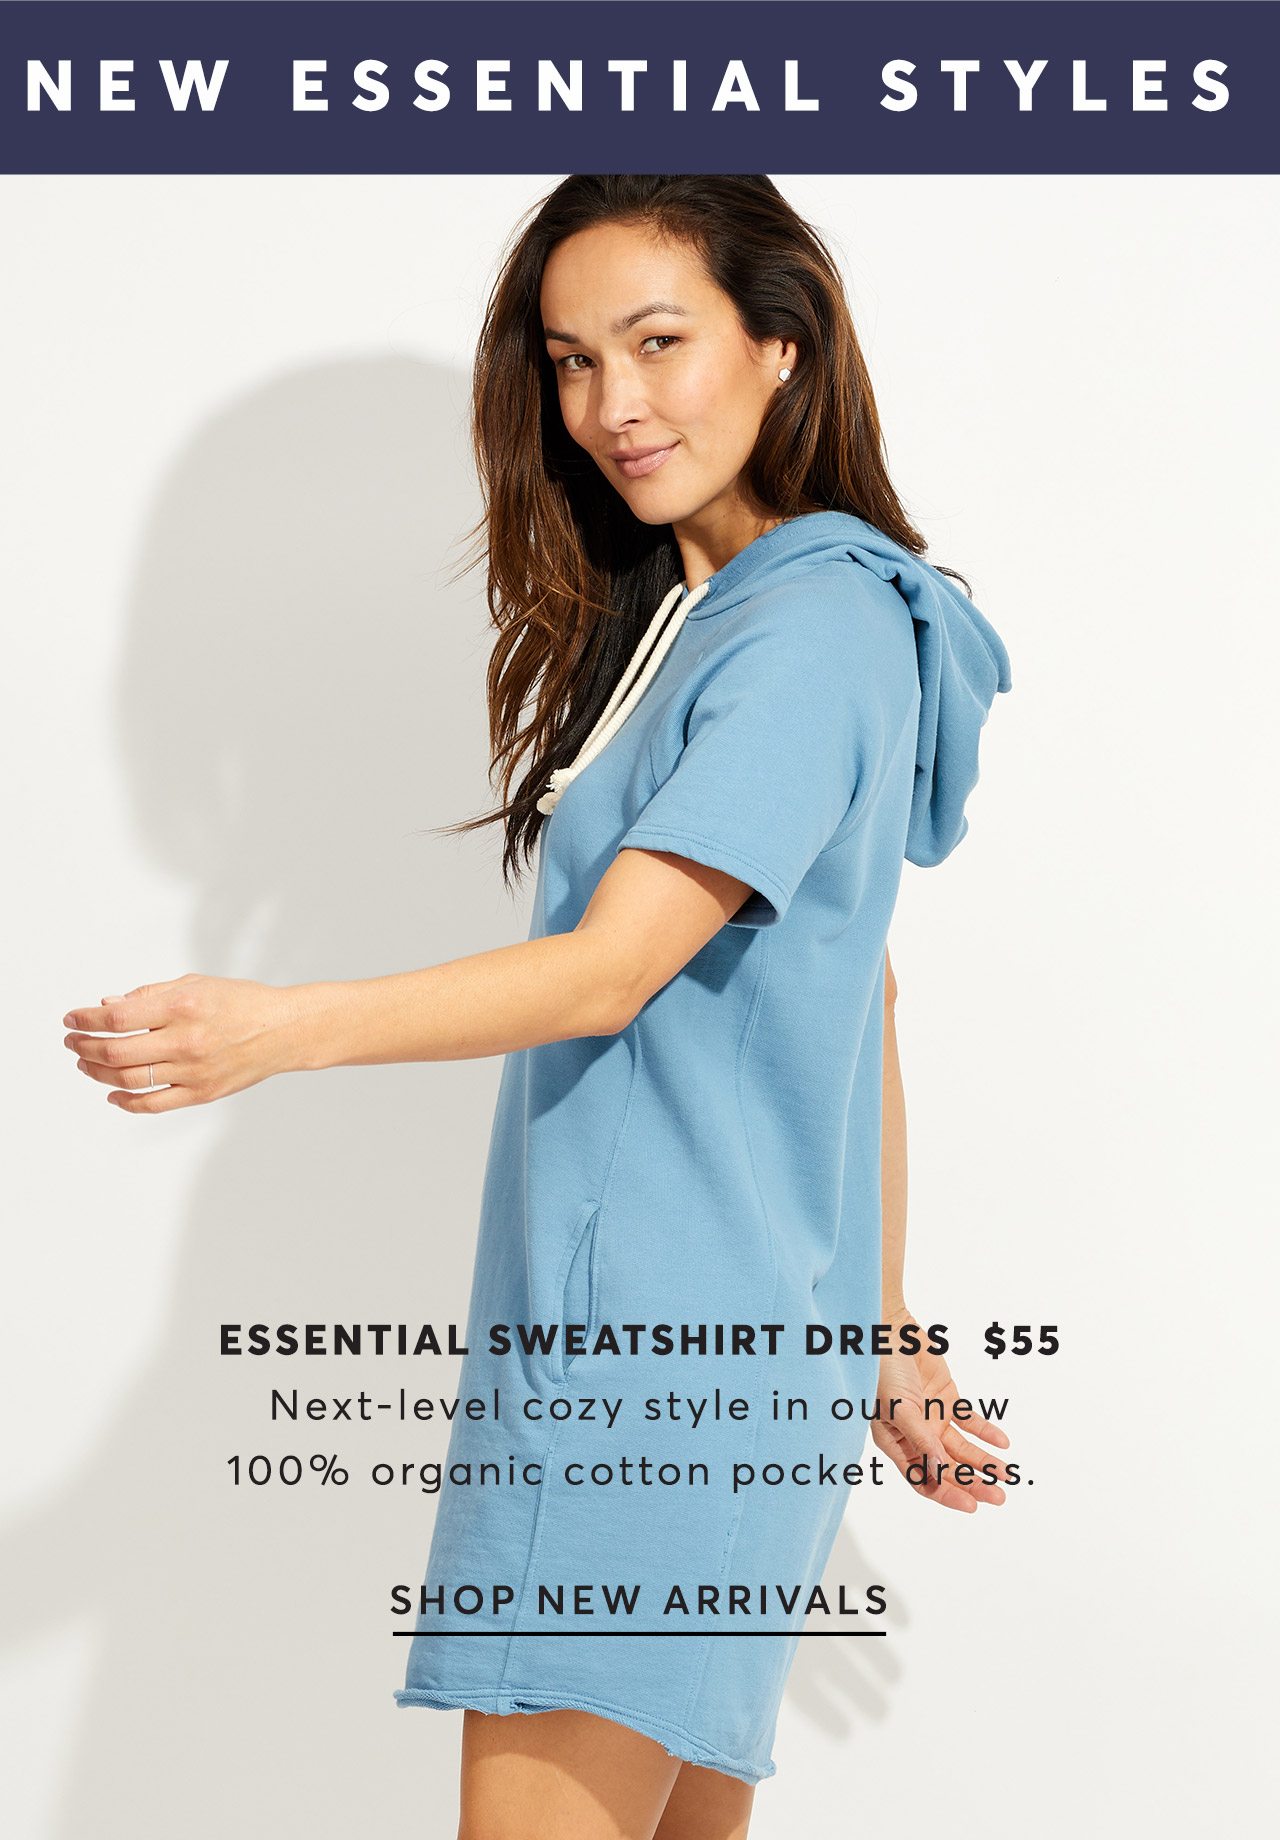 New Essential Styles just dropped! Essential Sweatshirt Dress $55. Next-level cozy style in our new 100% organic cotton pocket dress. Shop New Arrivals.